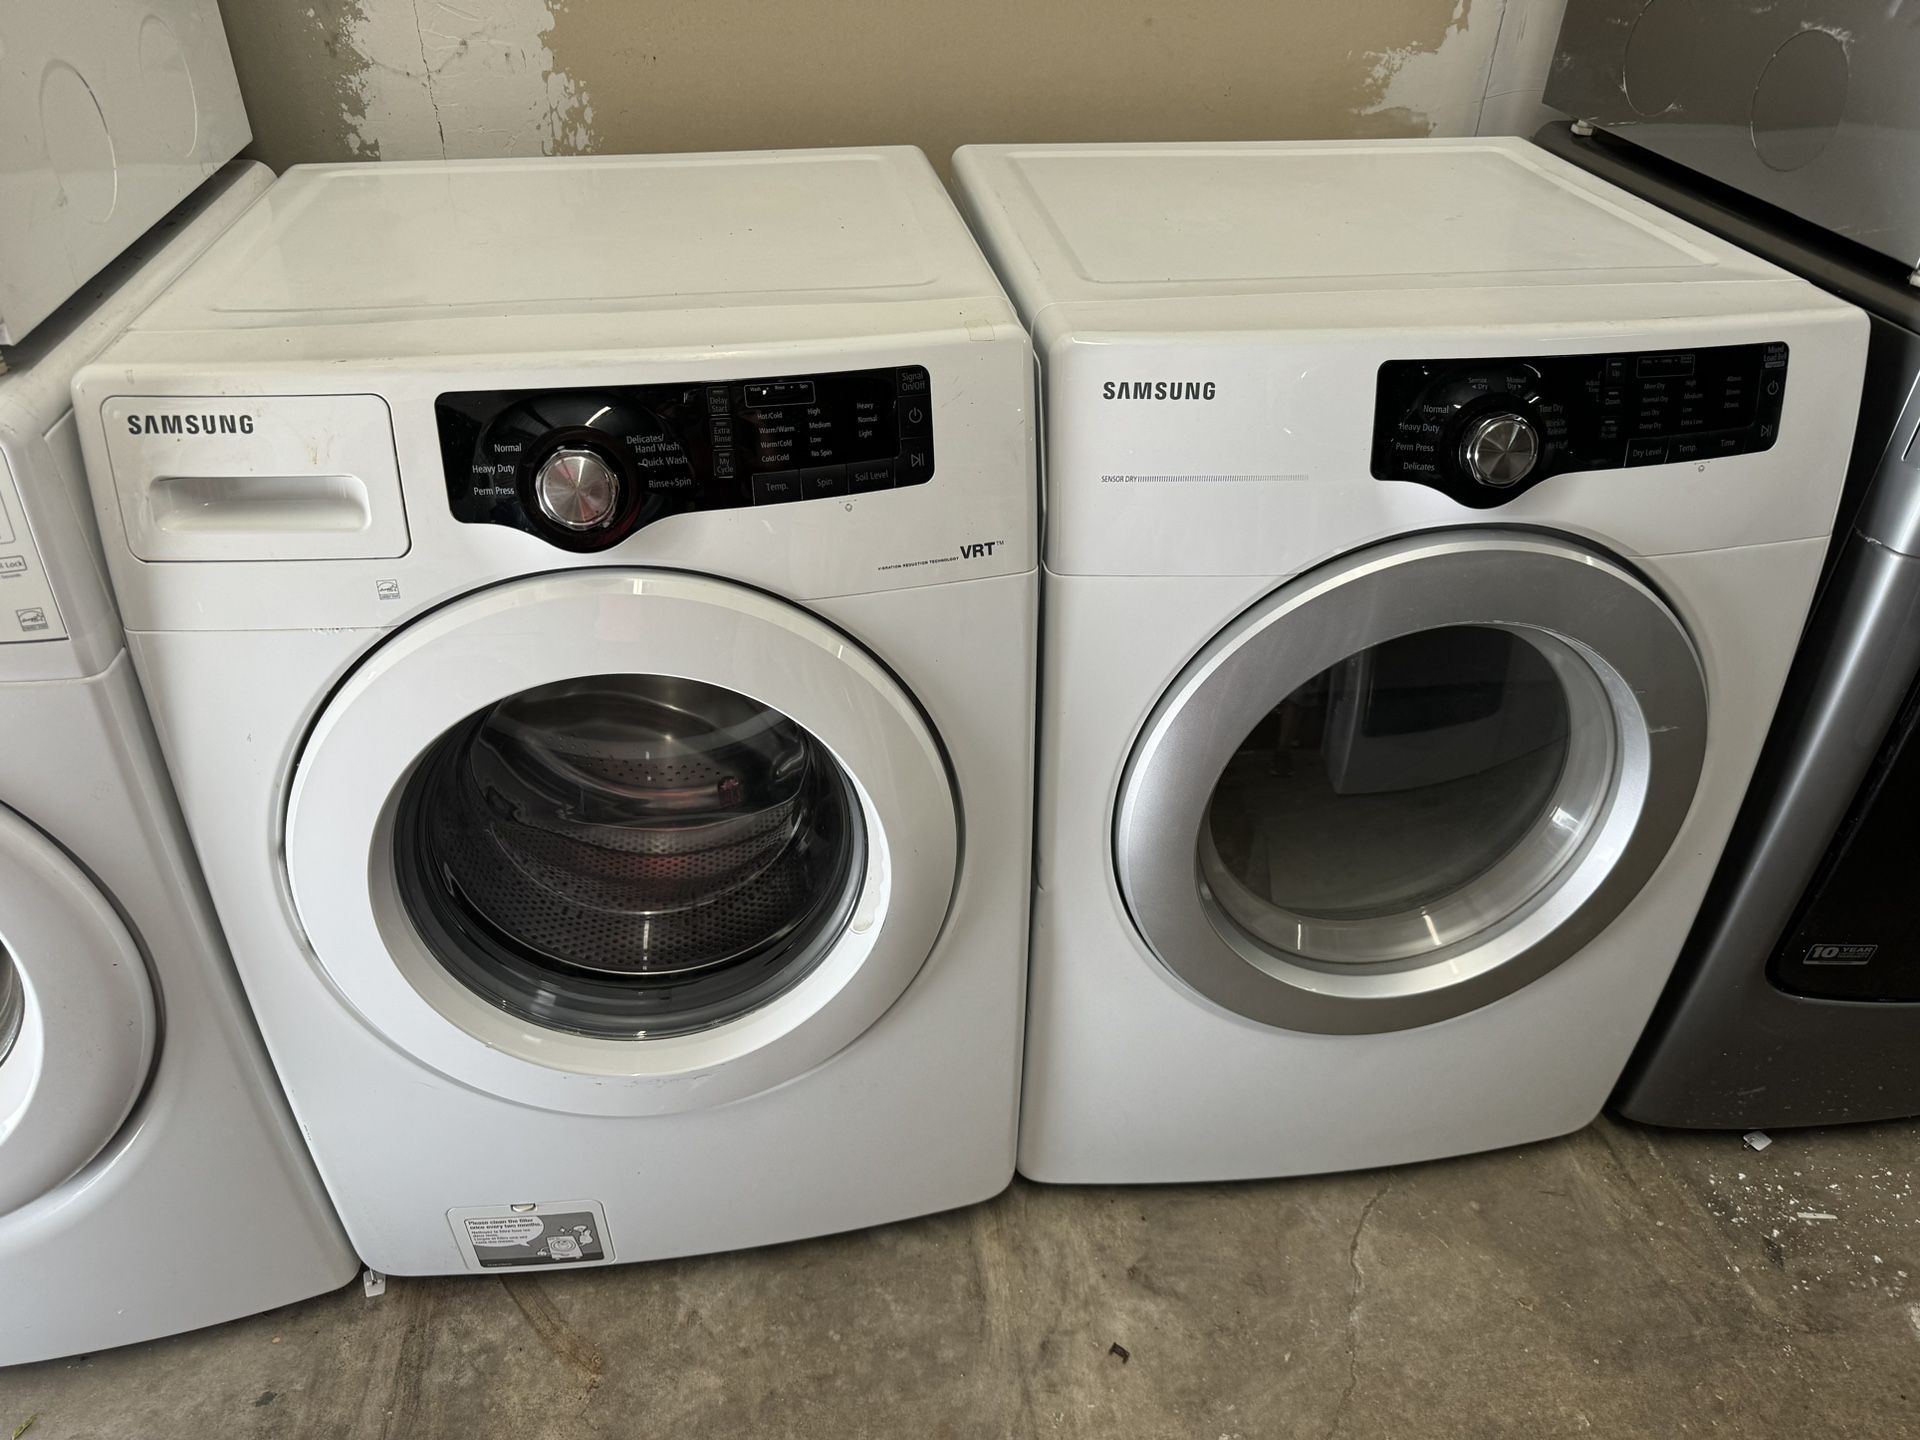 Samsung Washer And Samsung Electric Dryer